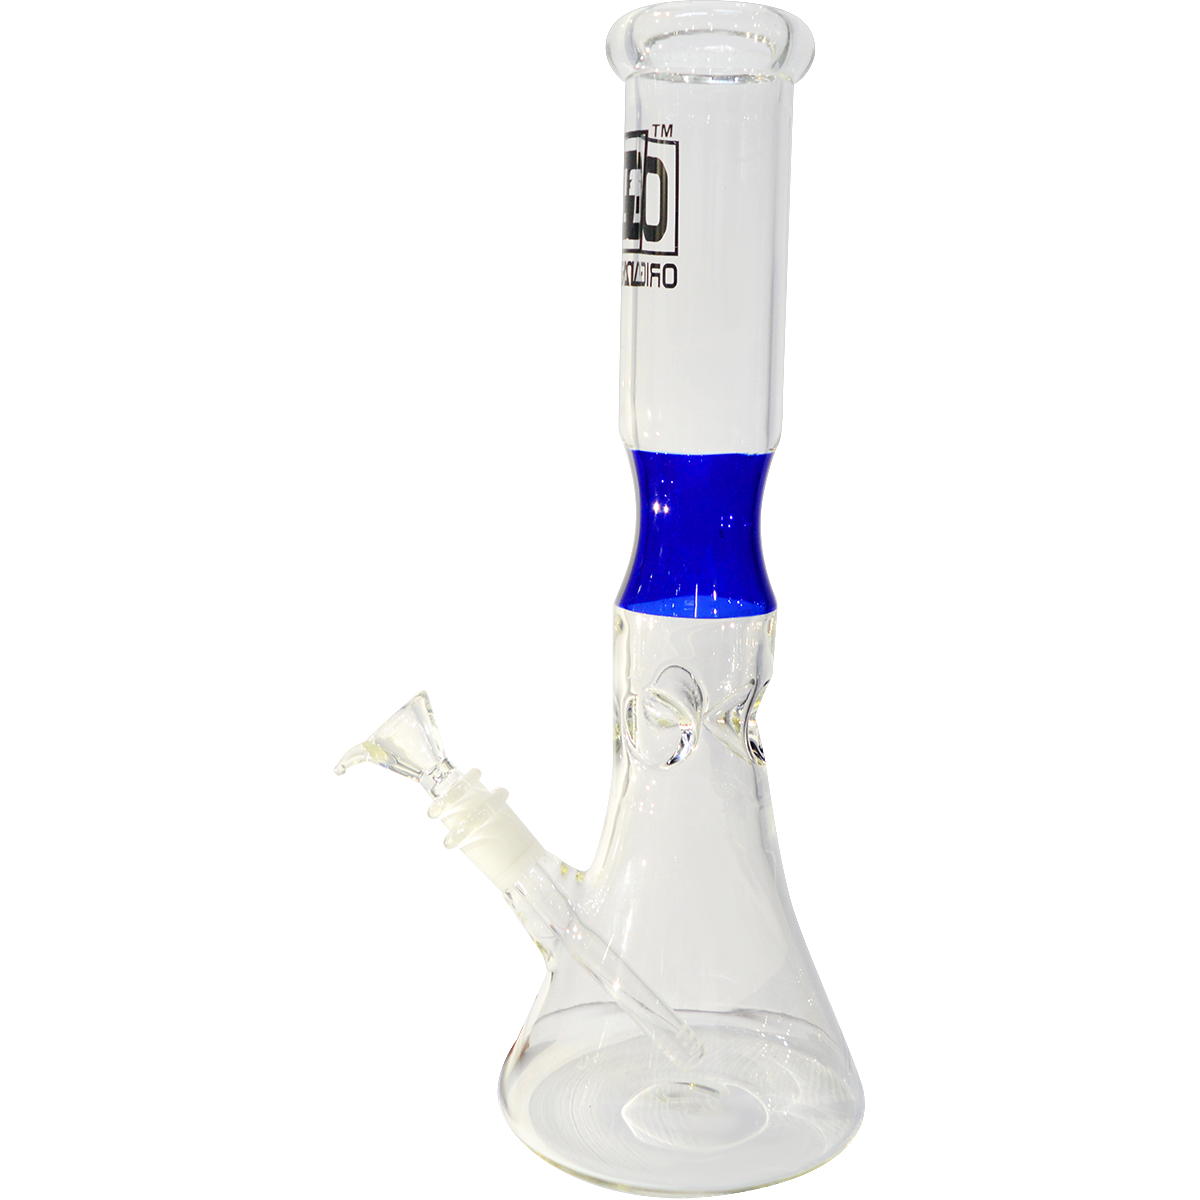  Inch 14 Decal Print Glass Ice Bong For Smoking 